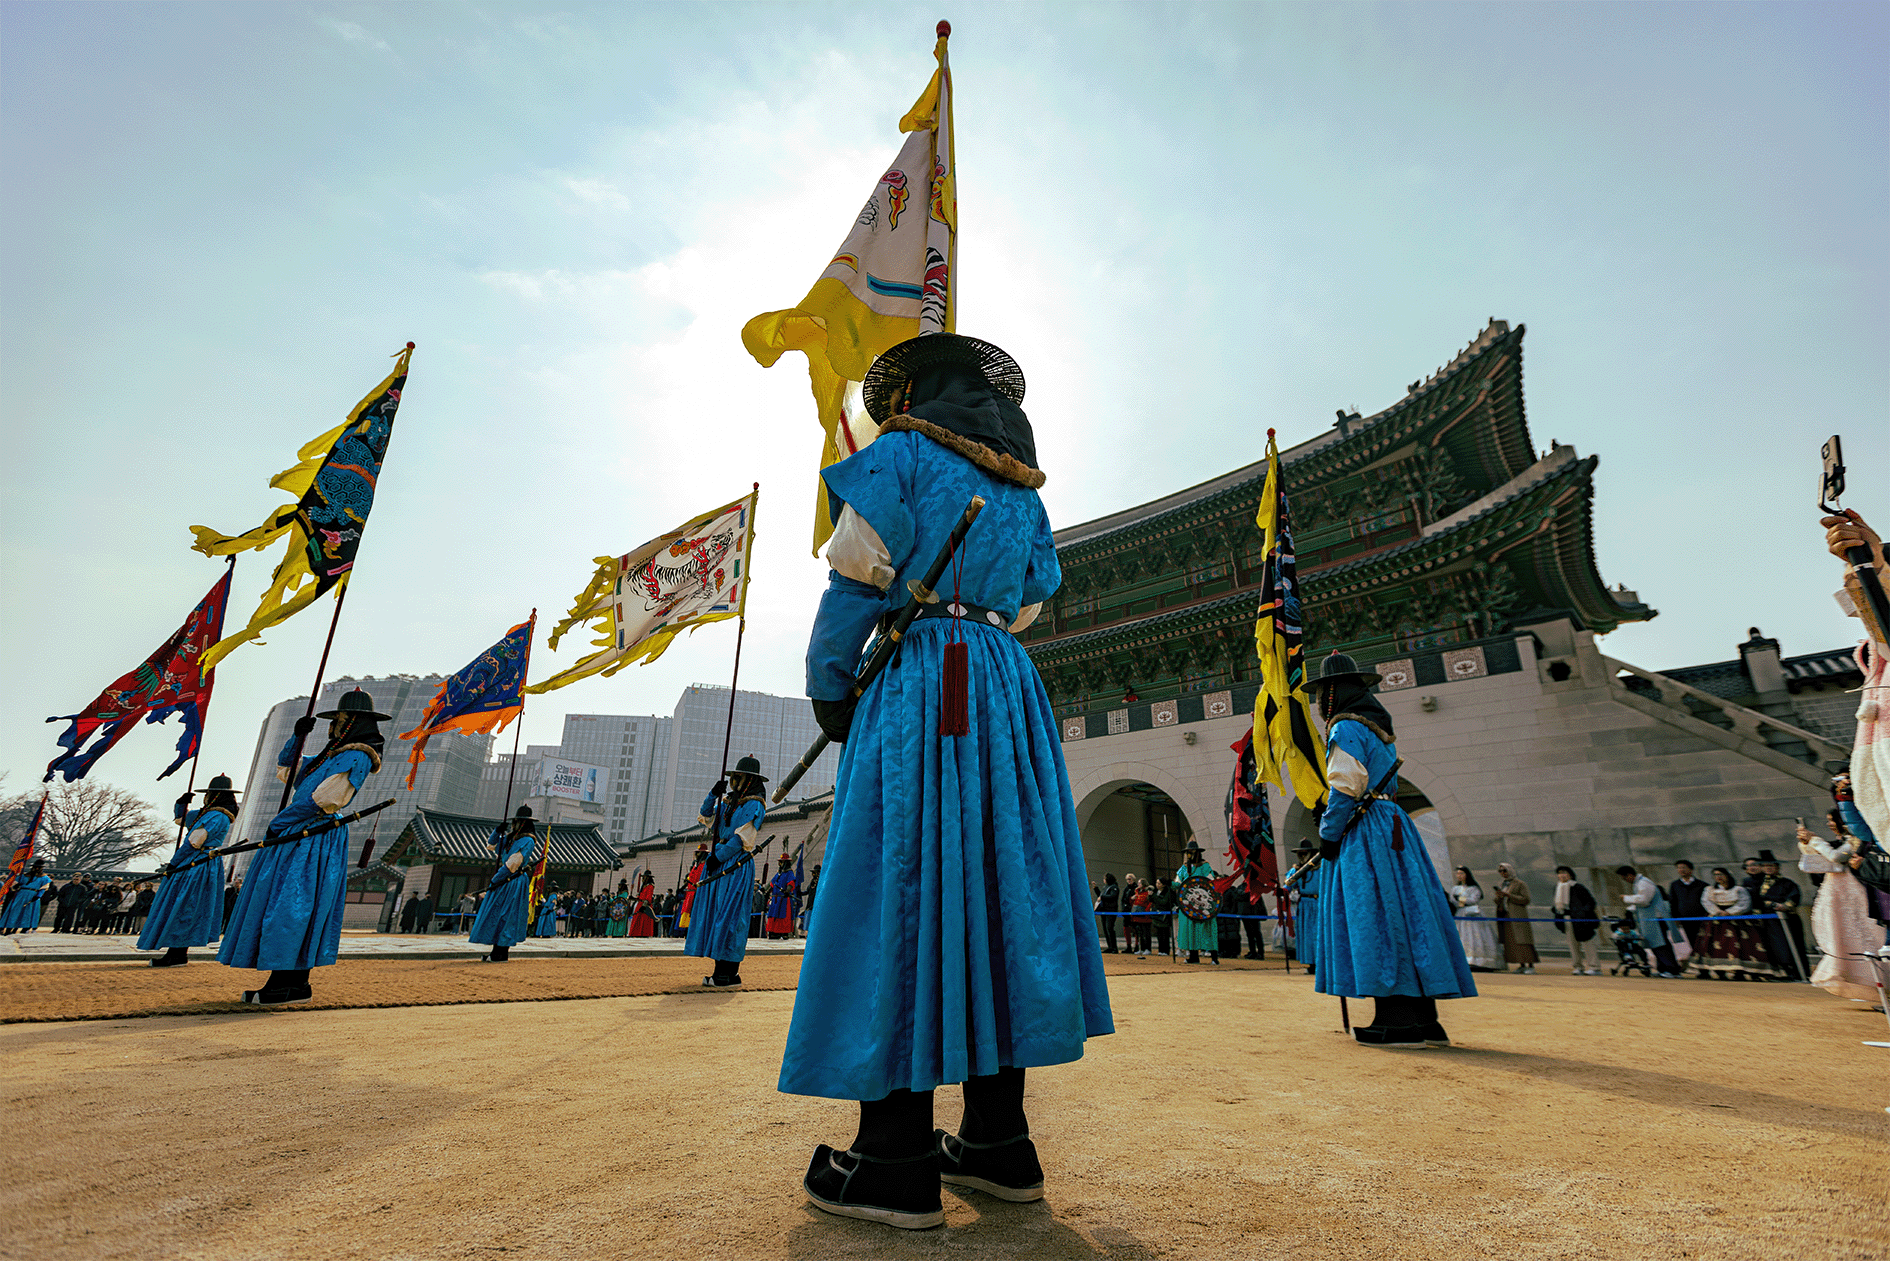 Traditional Korean ceremony with performers in historical attire carrying flags in front of a palace